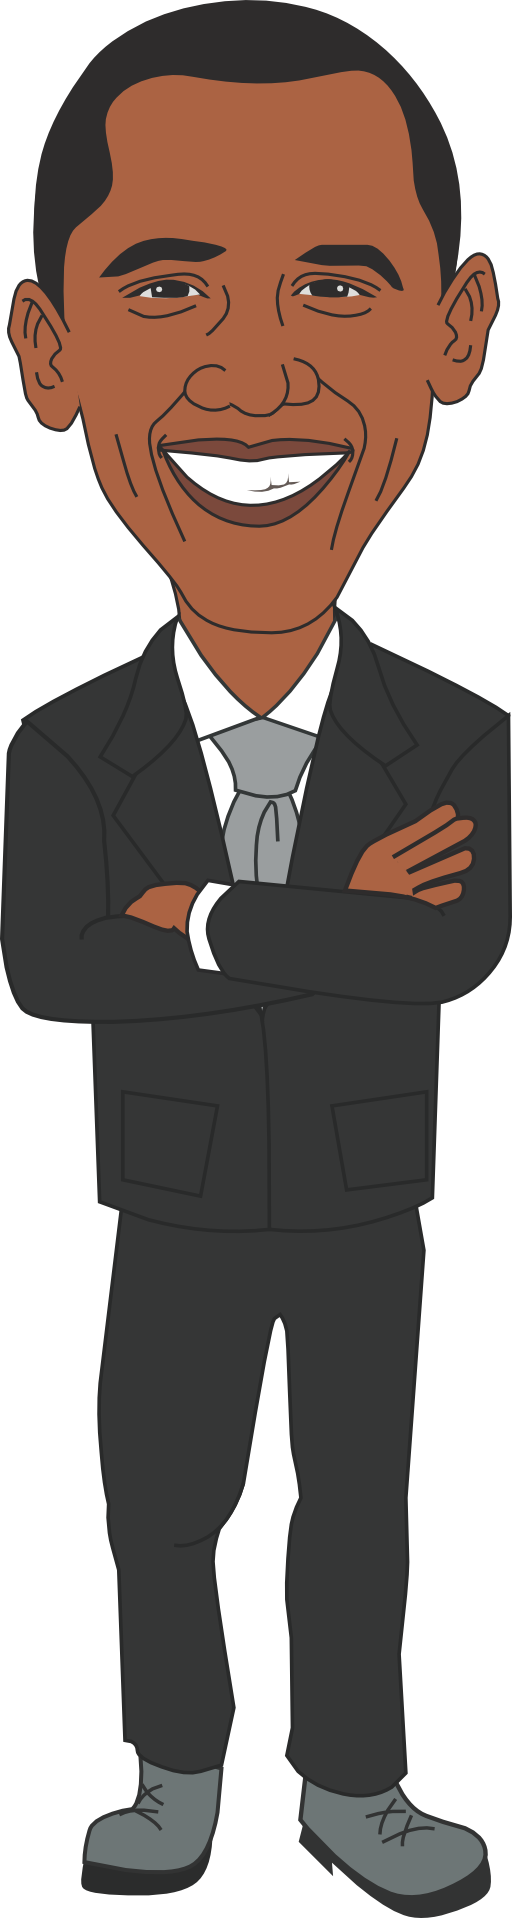 A Man In A Suit With His Arms Crossed